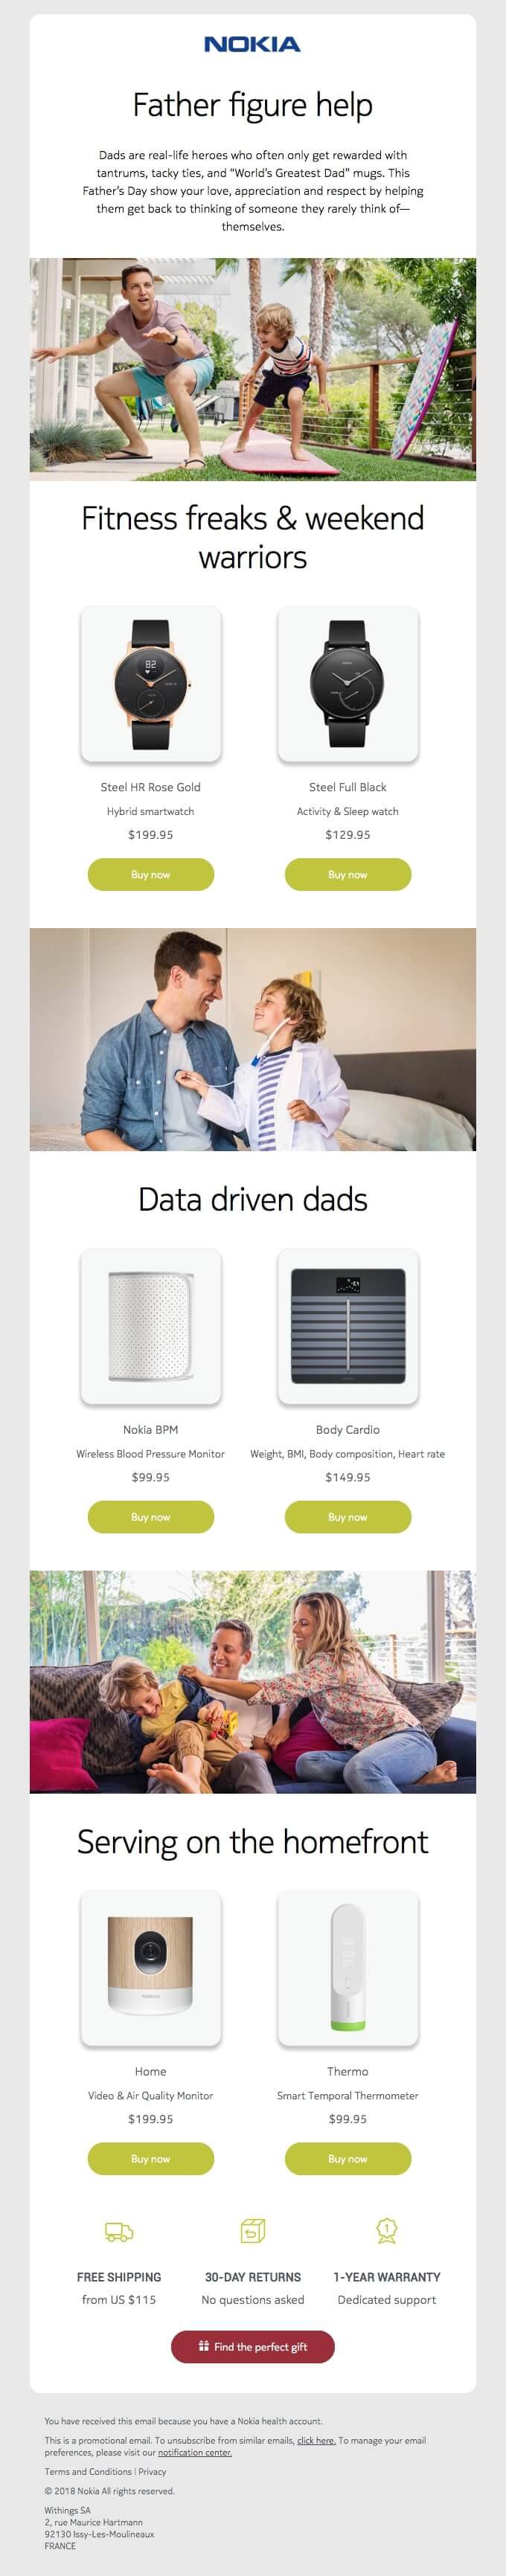 nokia-fathers-day-email